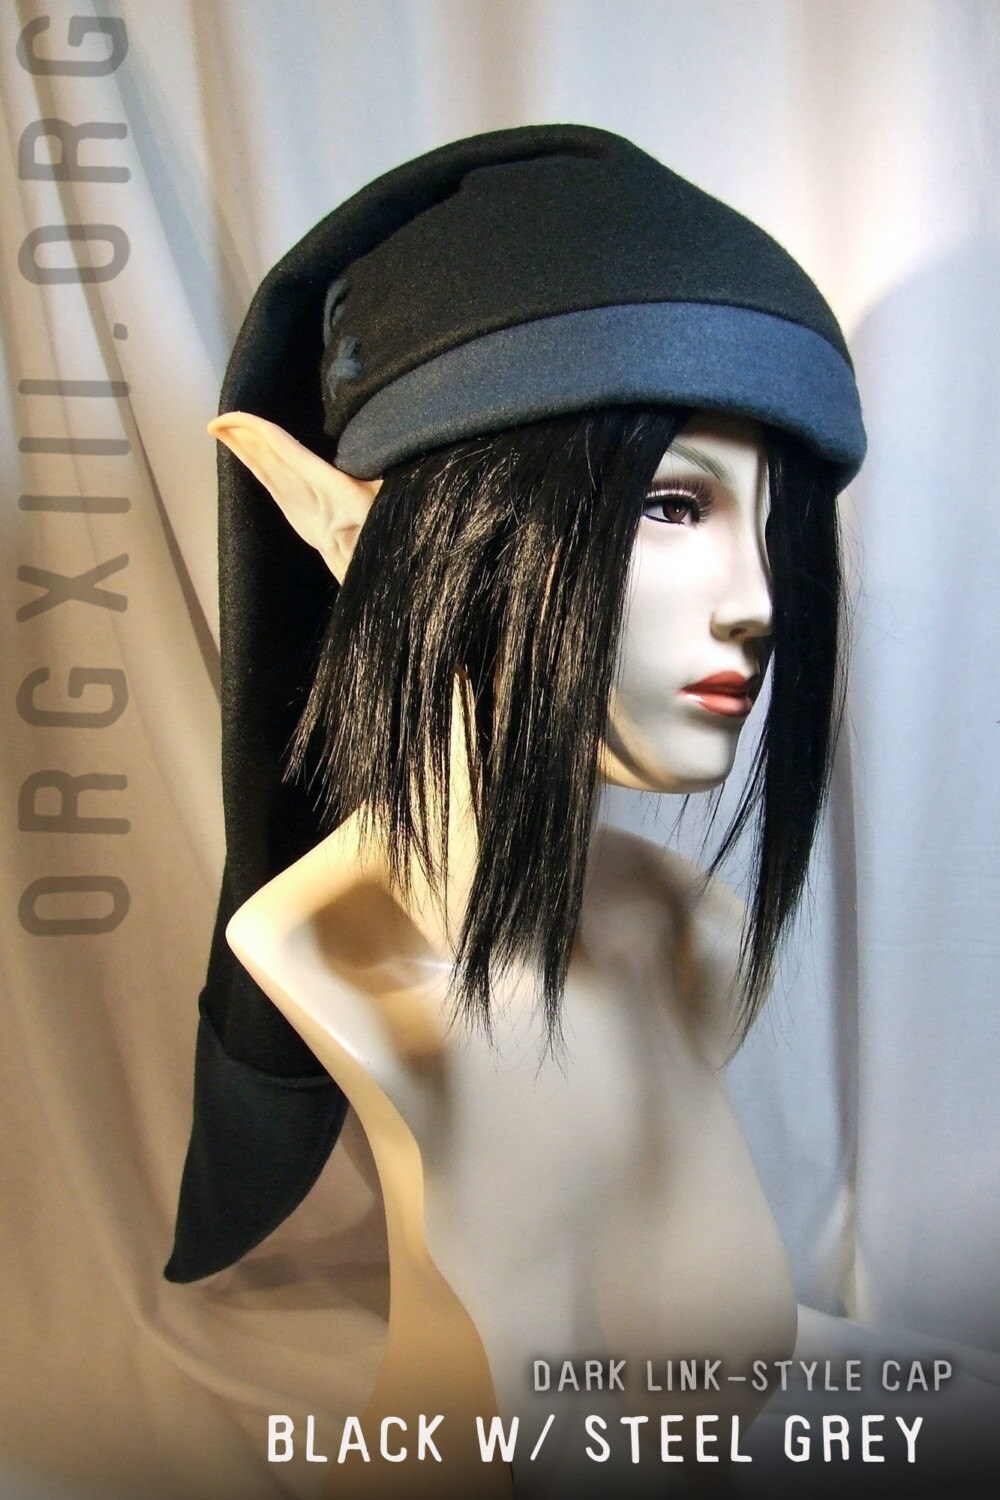 FINALLY They made Link's hat. For Sale! Il_fullxfull.101022453